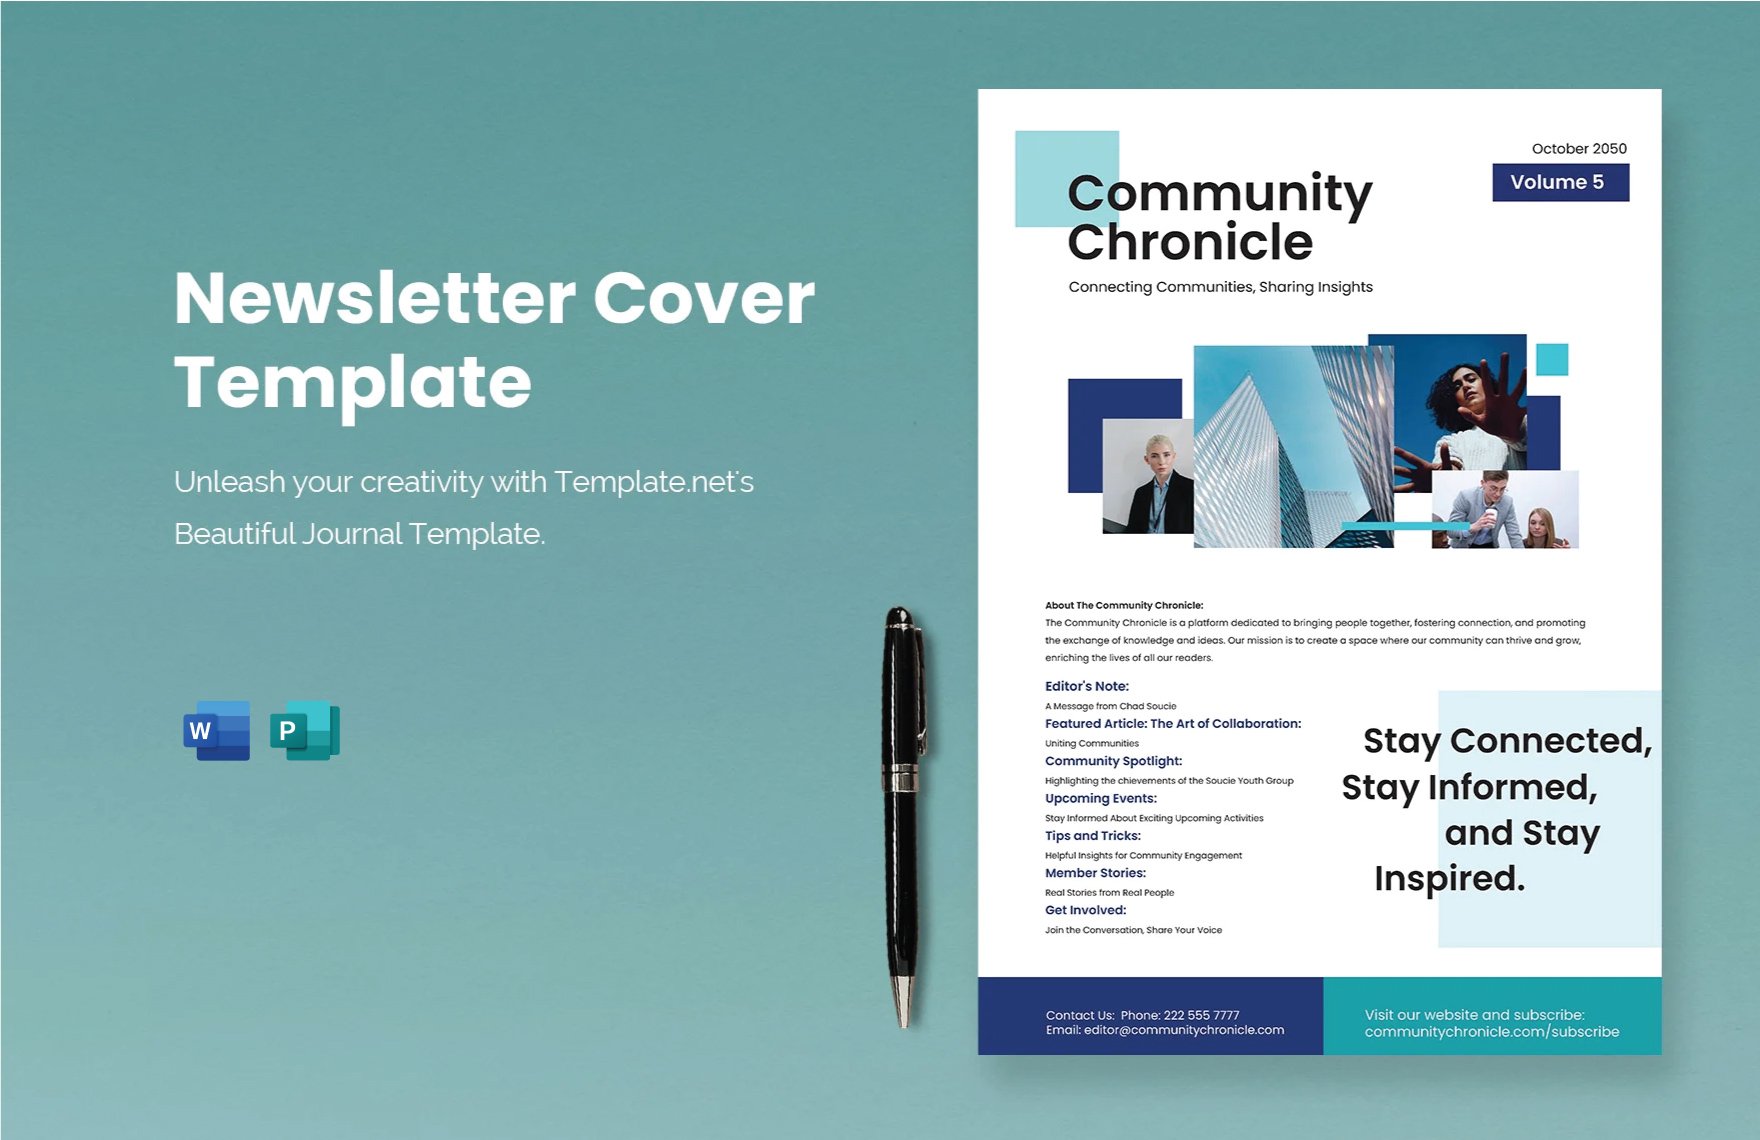 Newsletter Cover Template